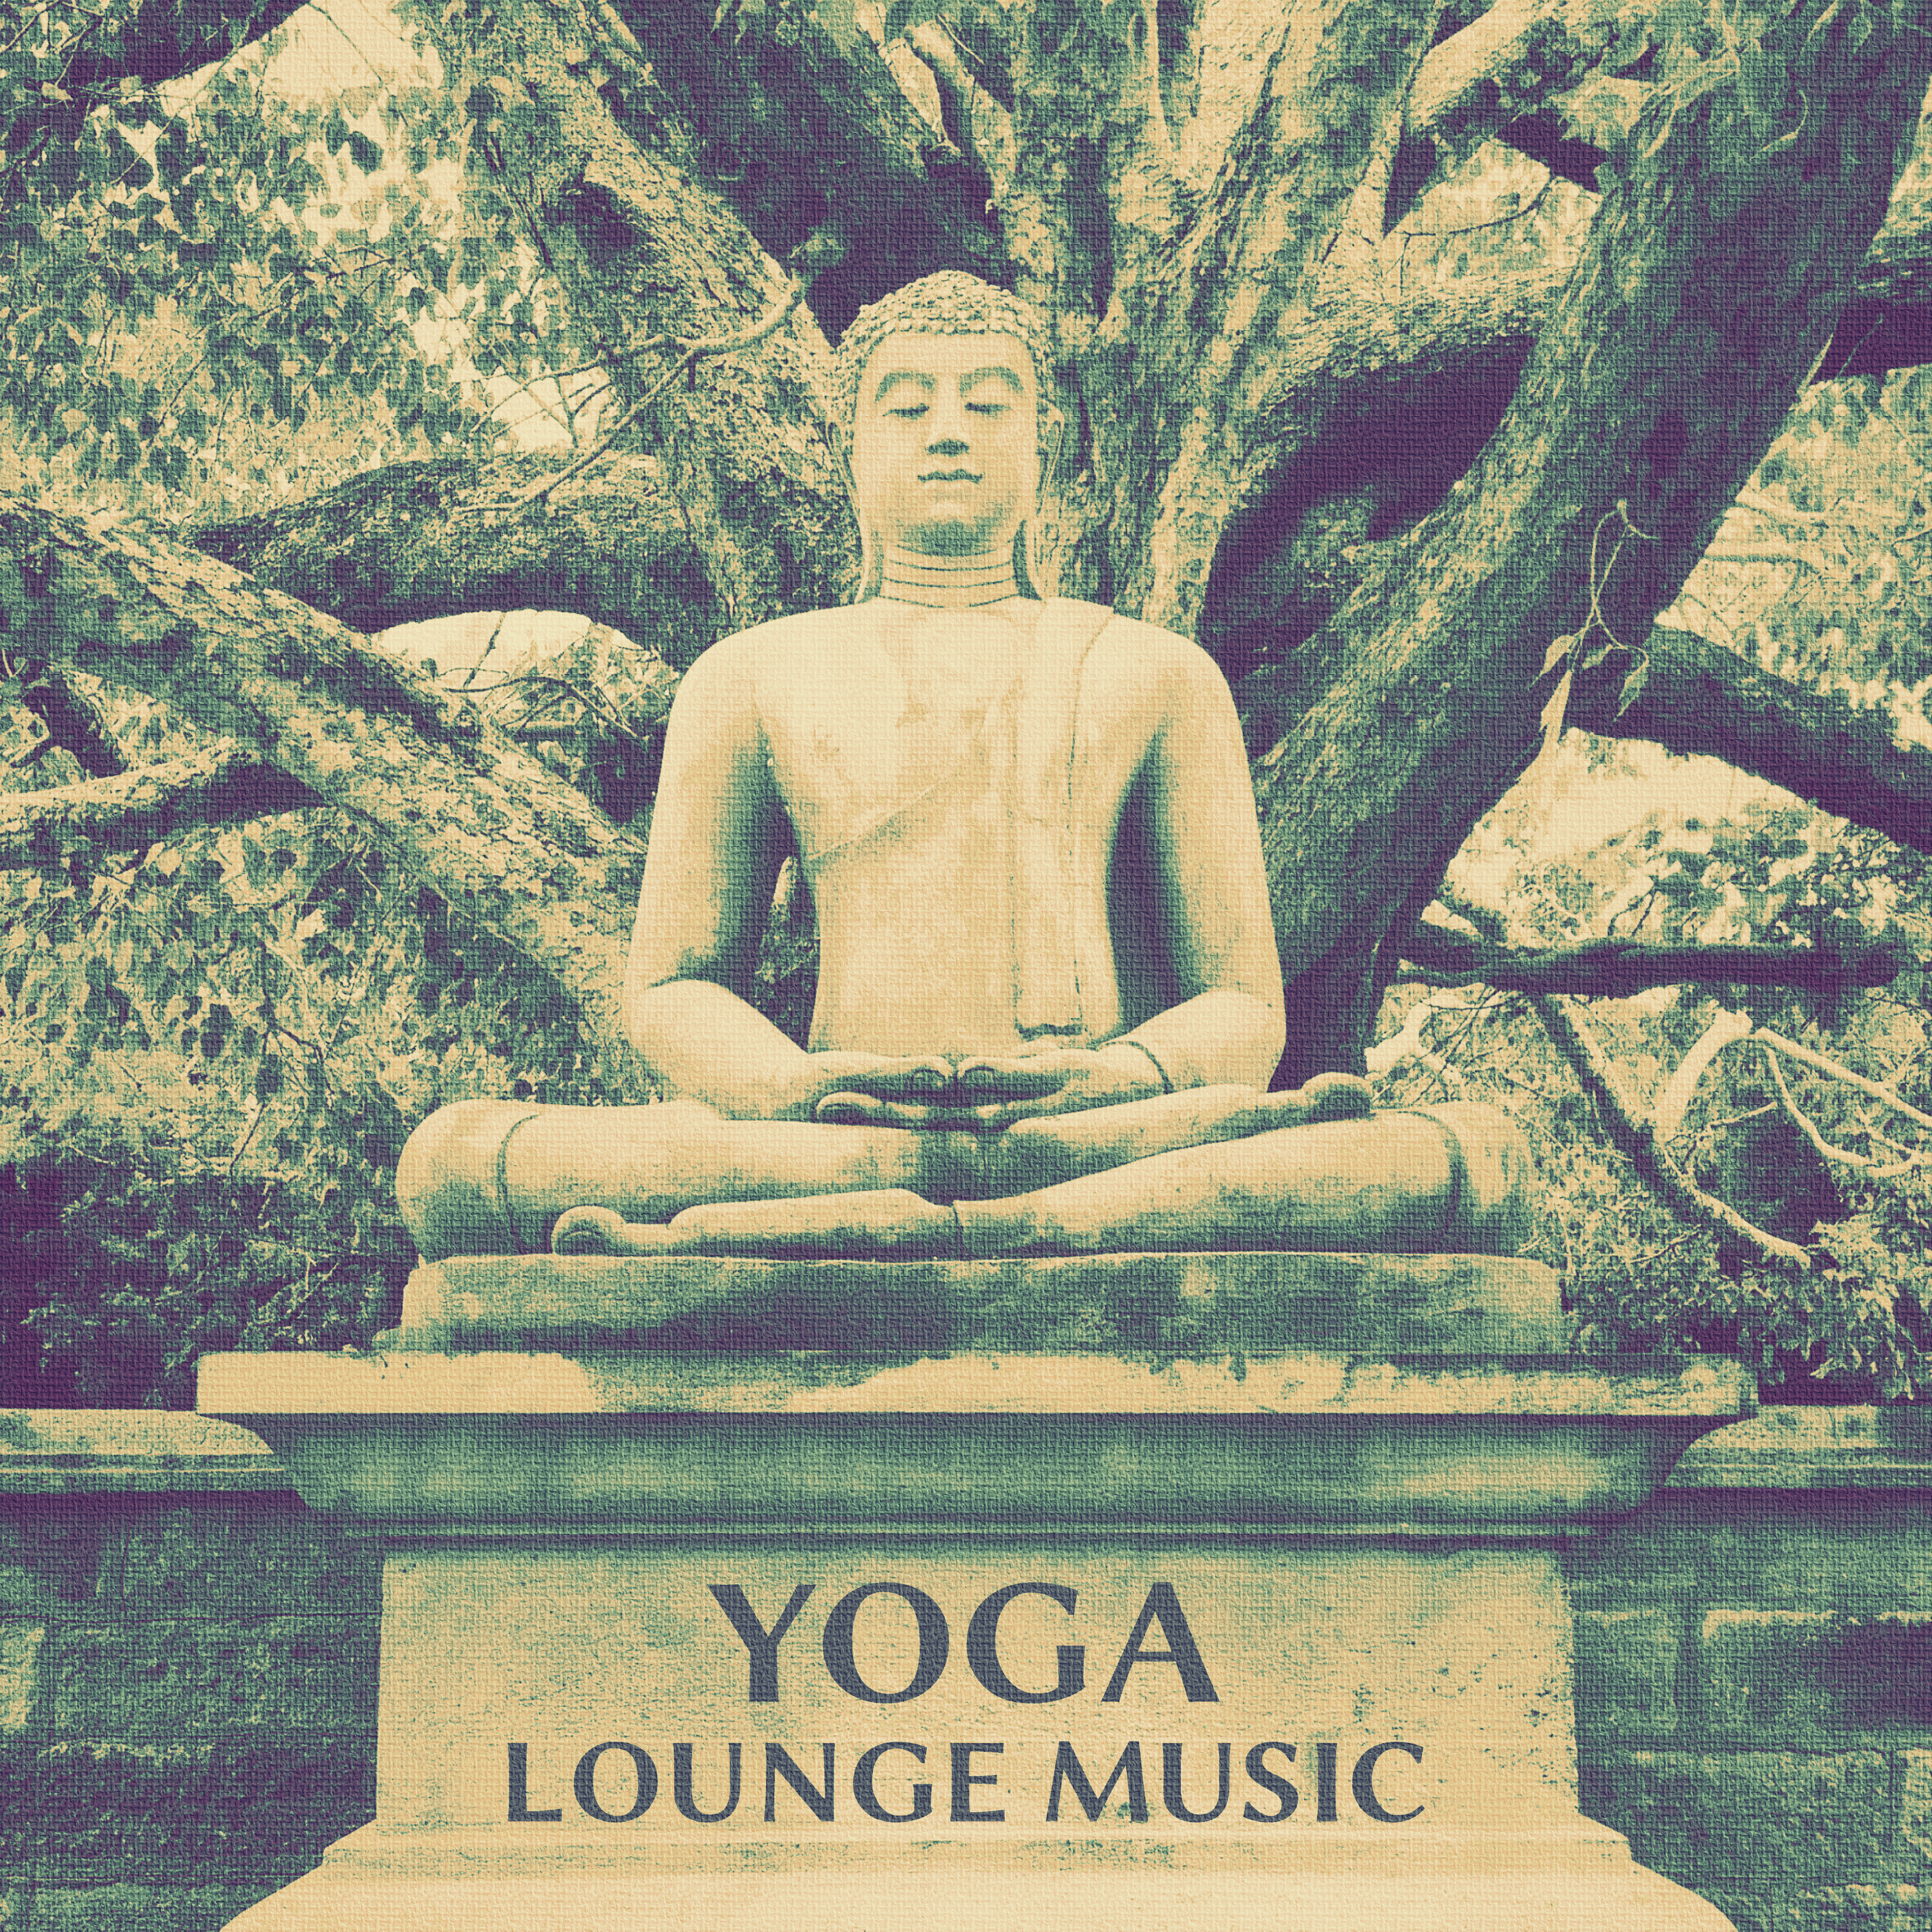 Yoga Lounge Music  Calming Sounds of New Age Music for Pure Mediatation, Mindfulness Training, Pure Relax and Feel Inner Energy